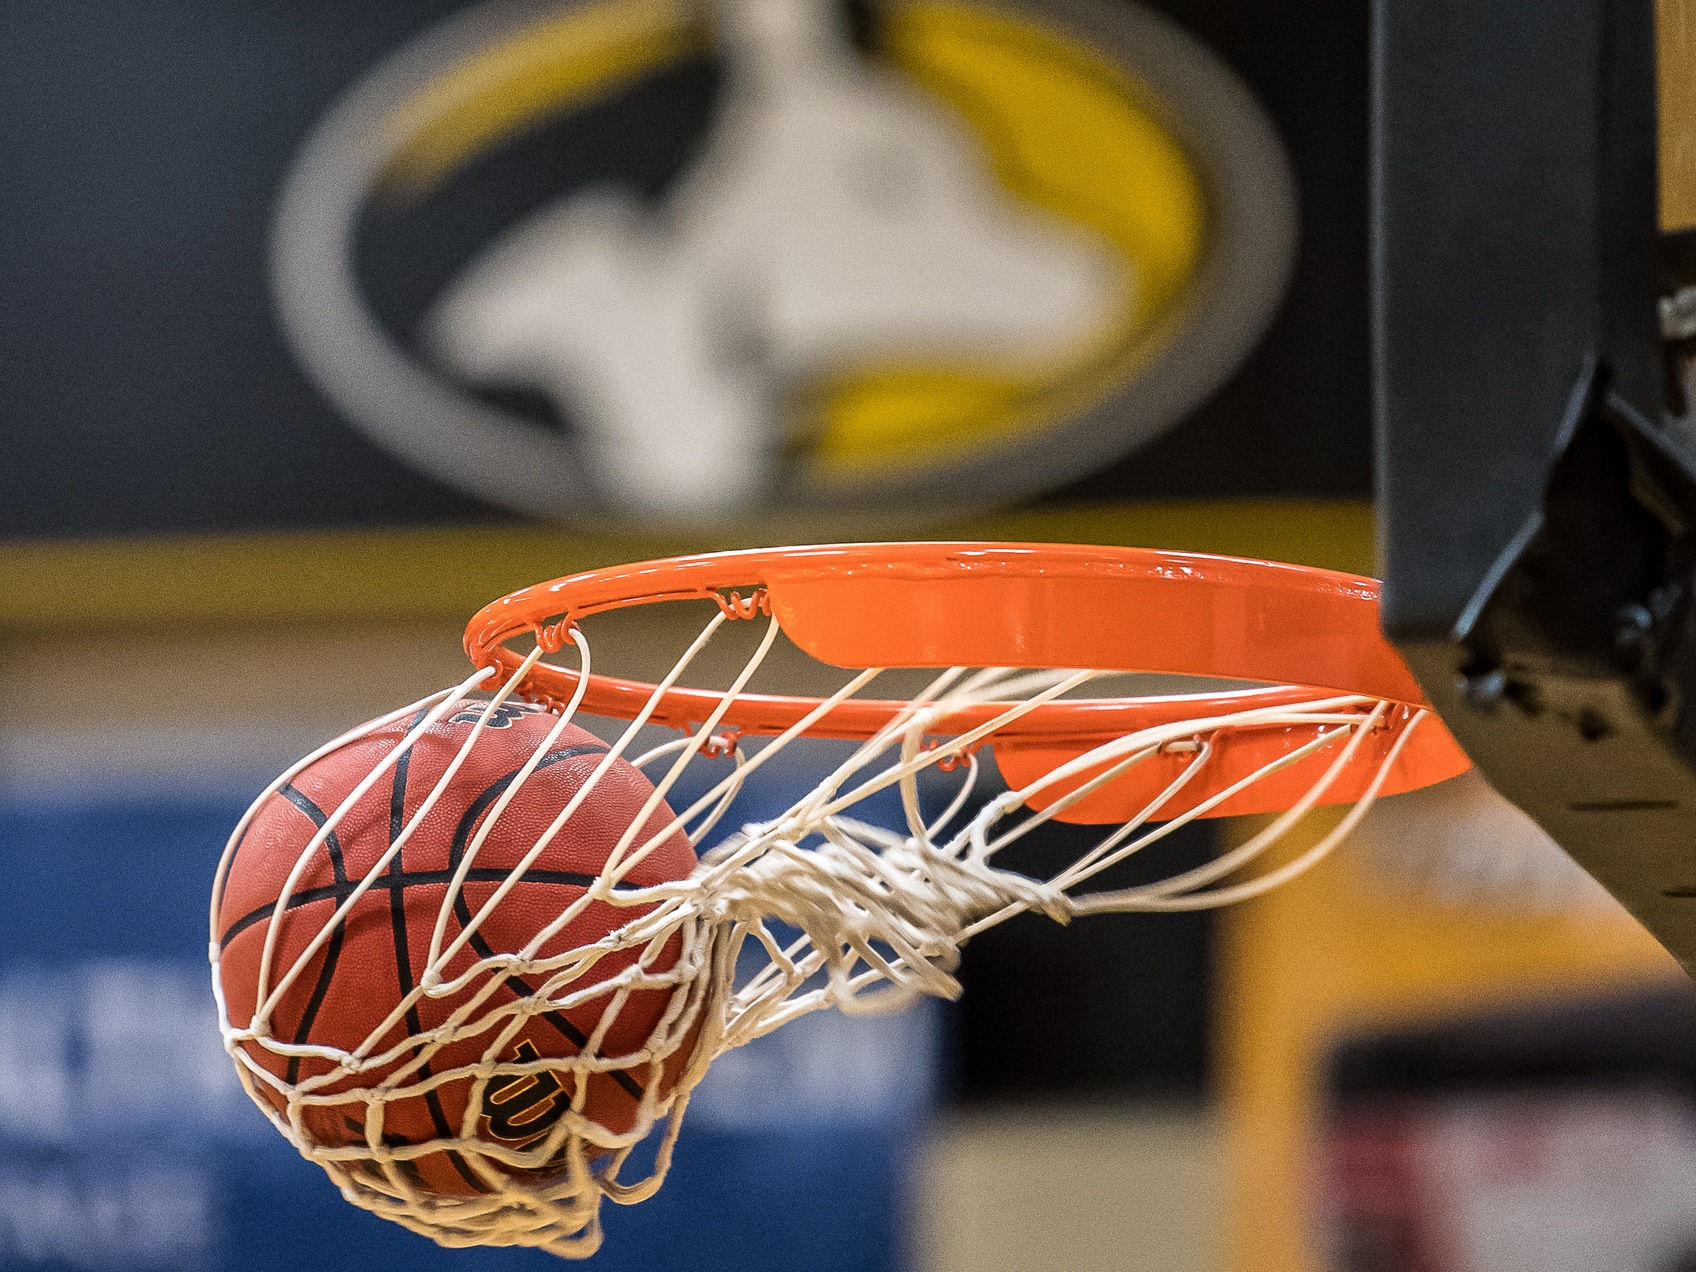 Game Times for Saturday Basketball Doubleheader Changed